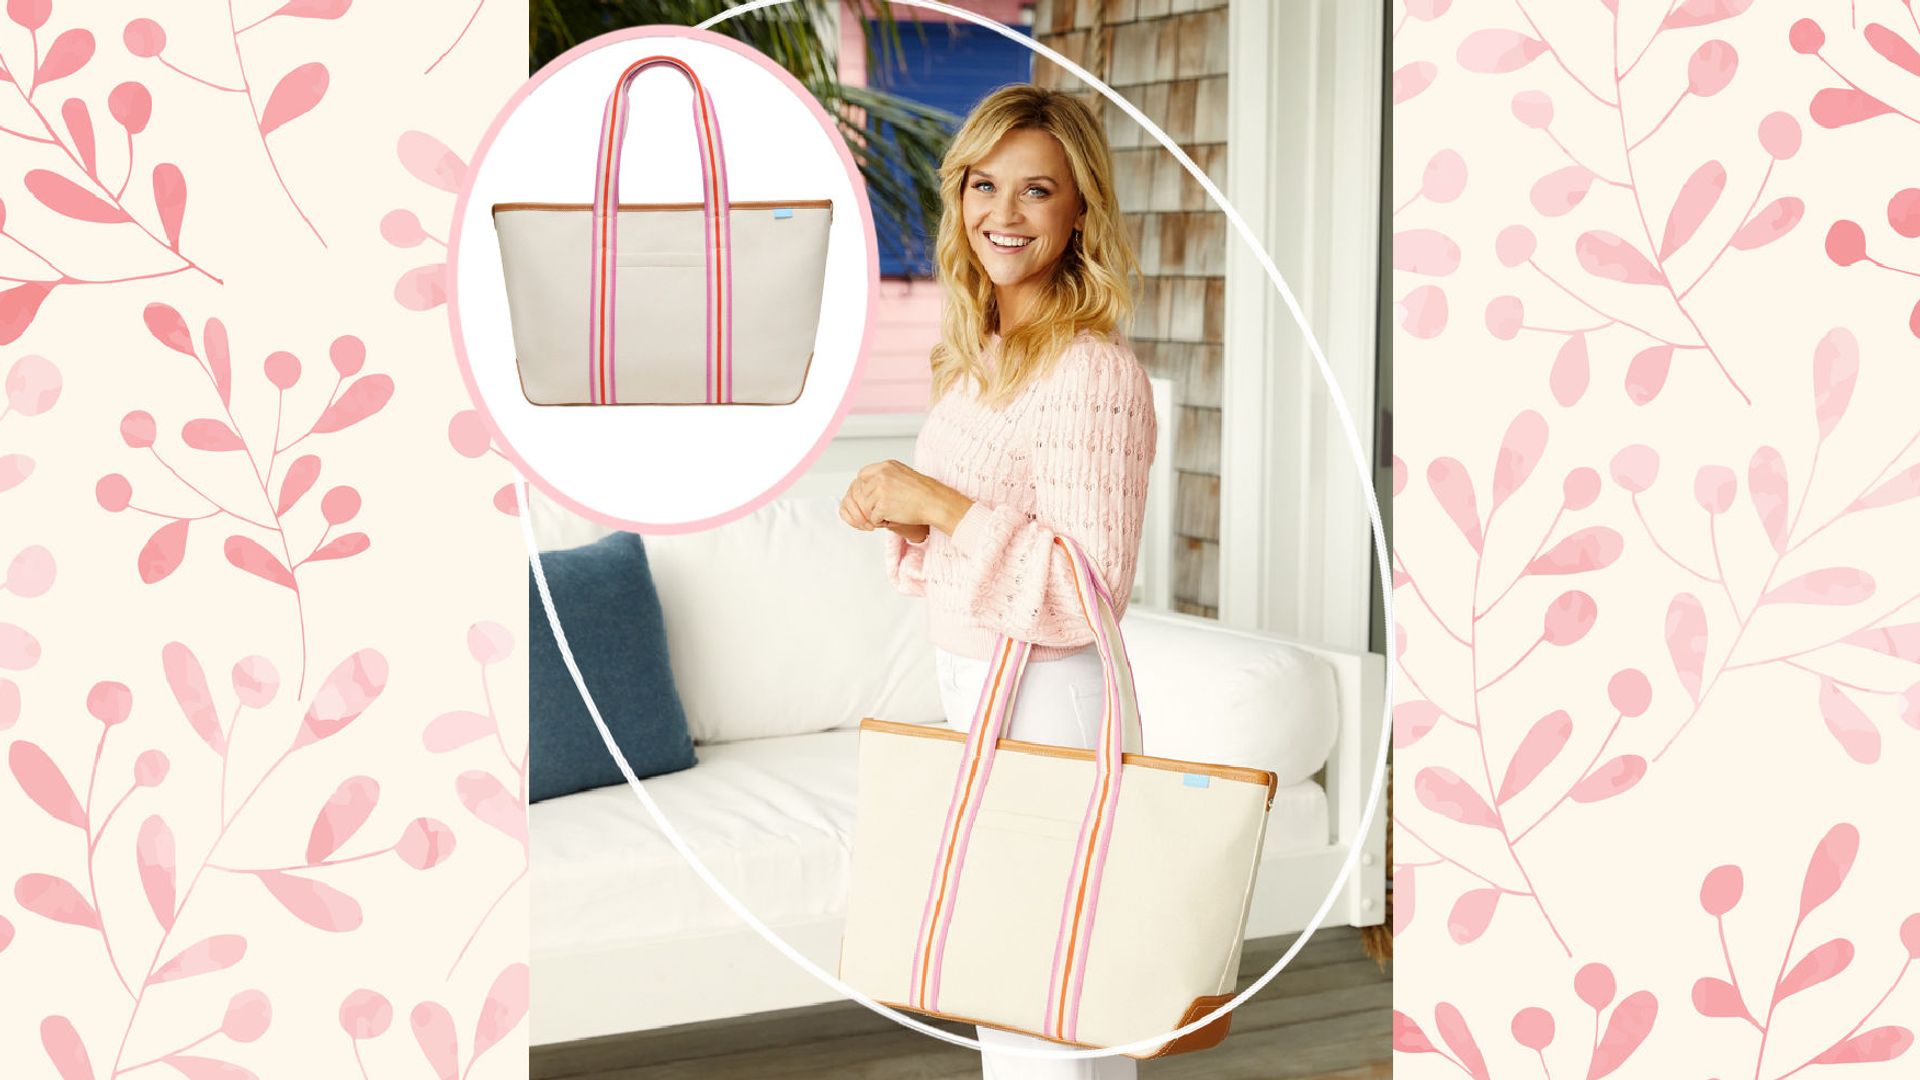 Reese Witherspoon just launched the cutest limited-edition tote bag